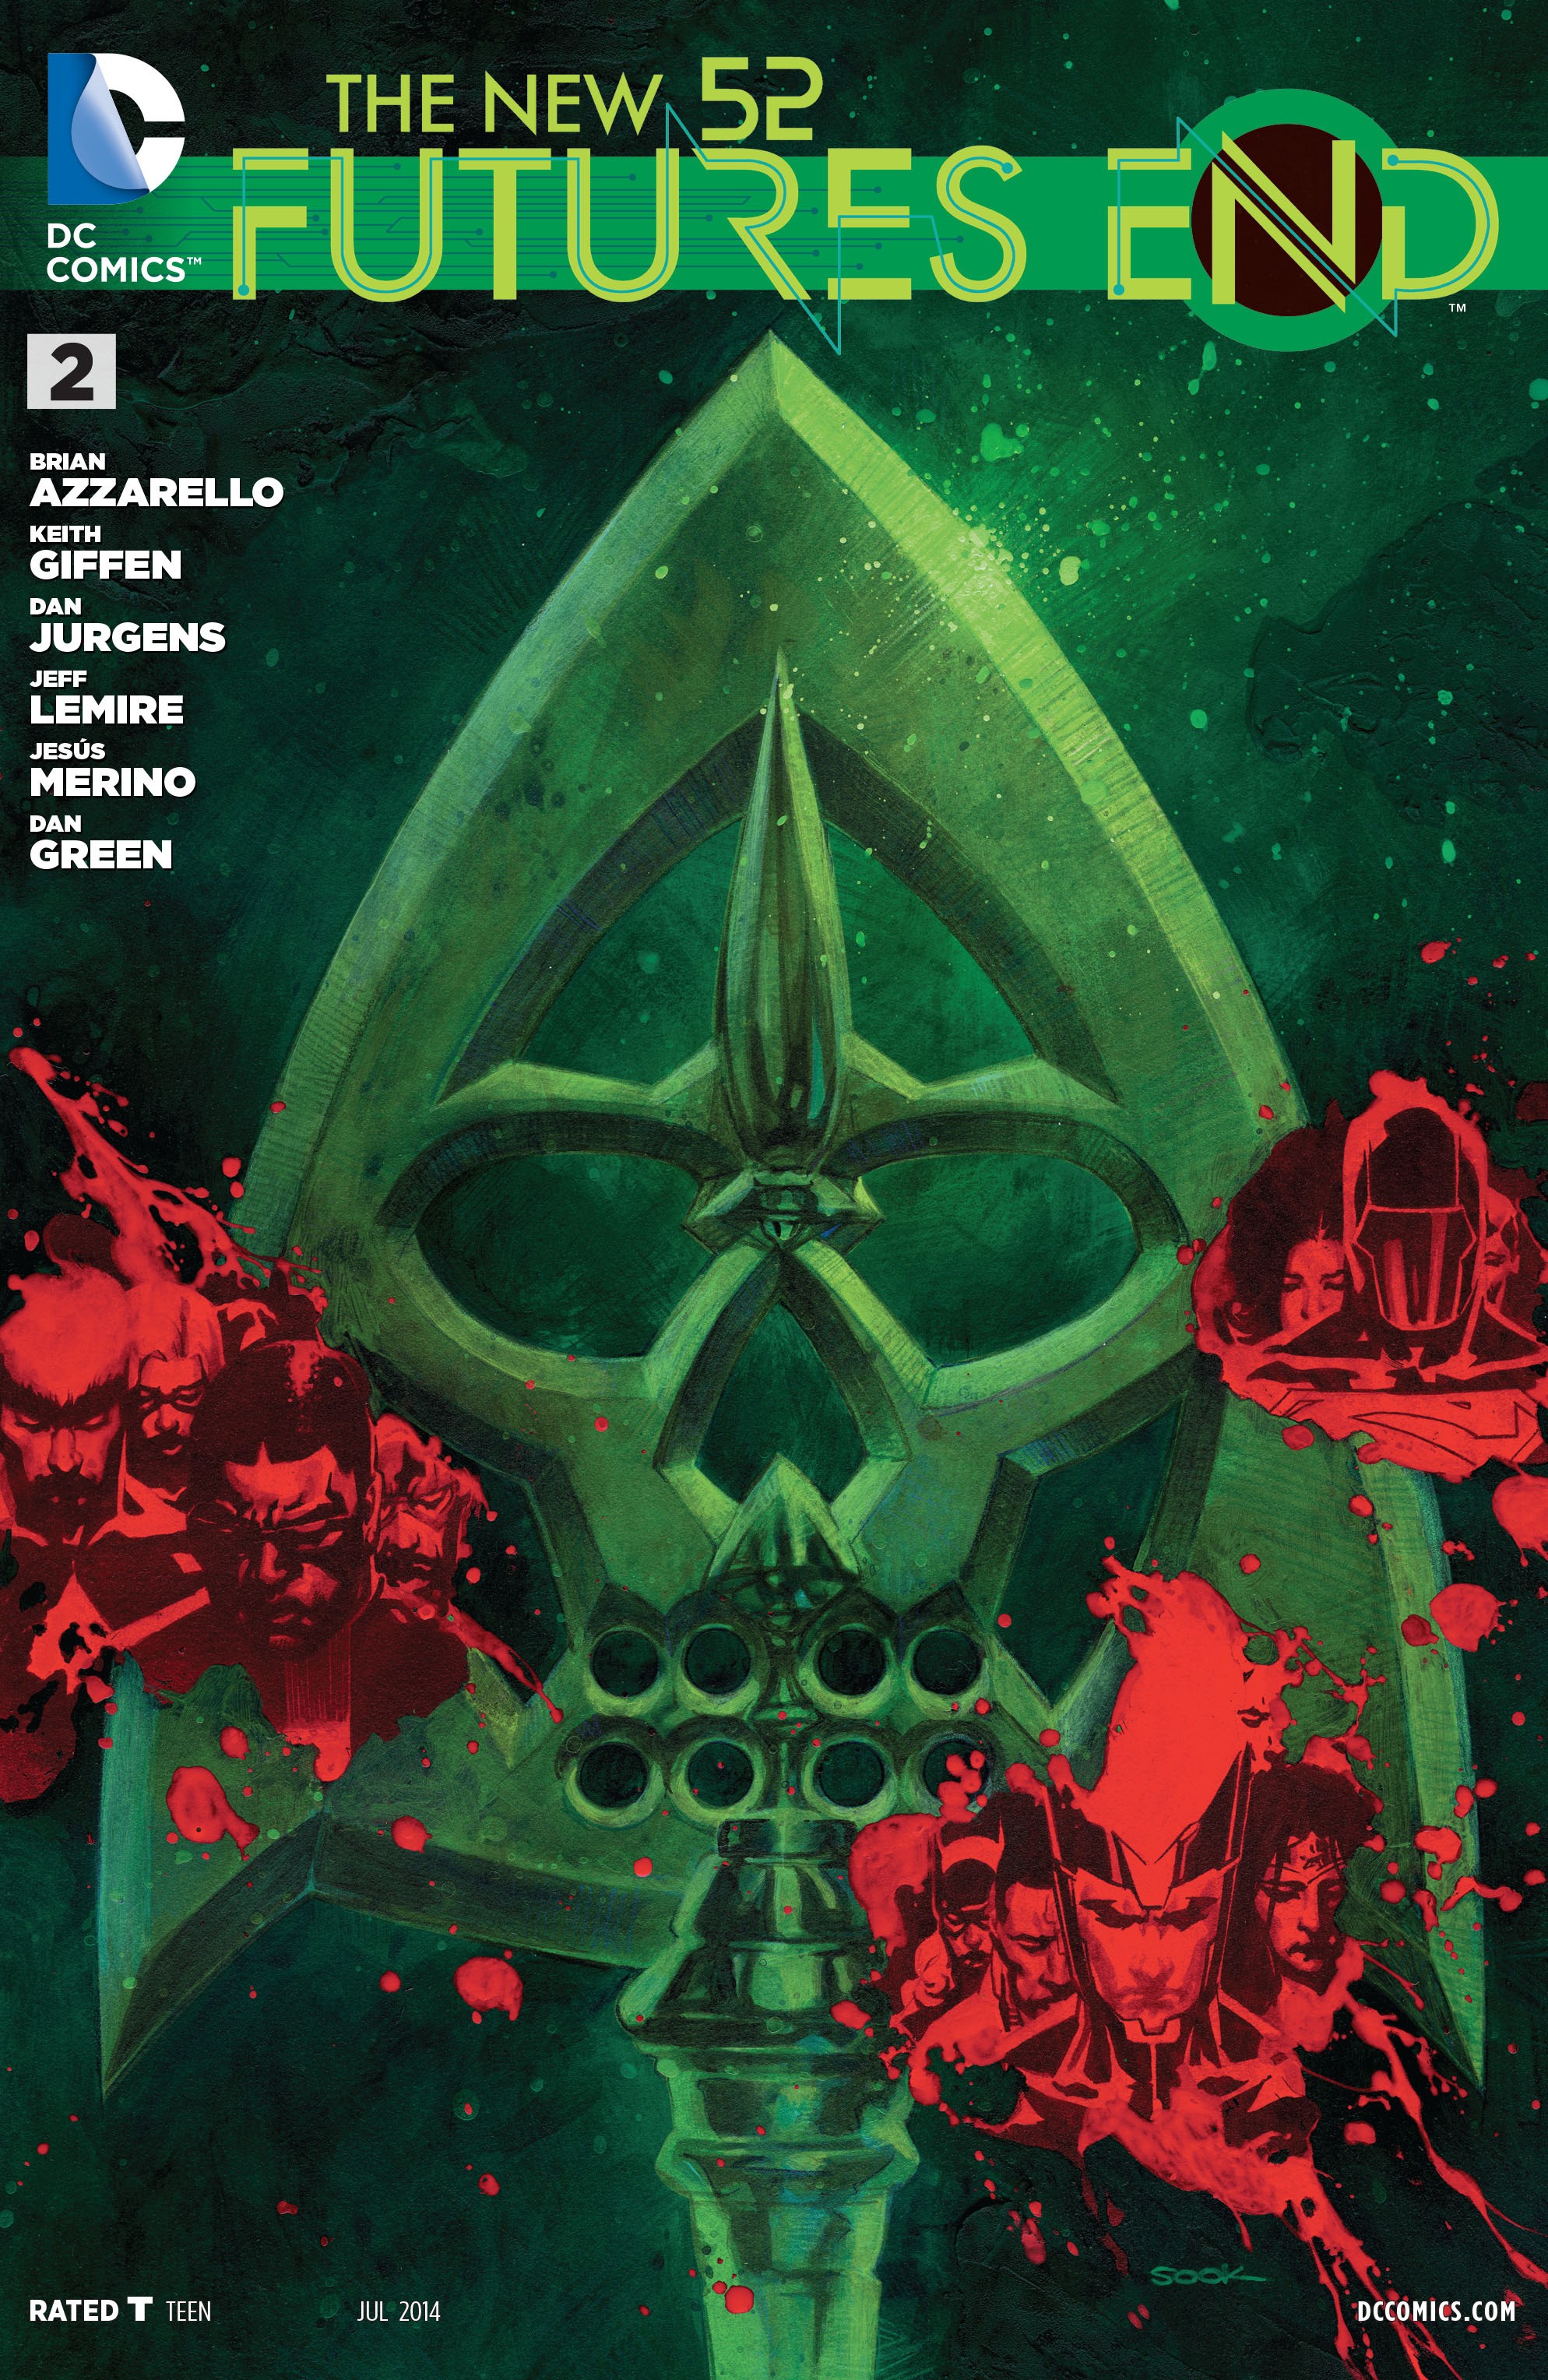 The New 52: Futures End Vol. 1 #2